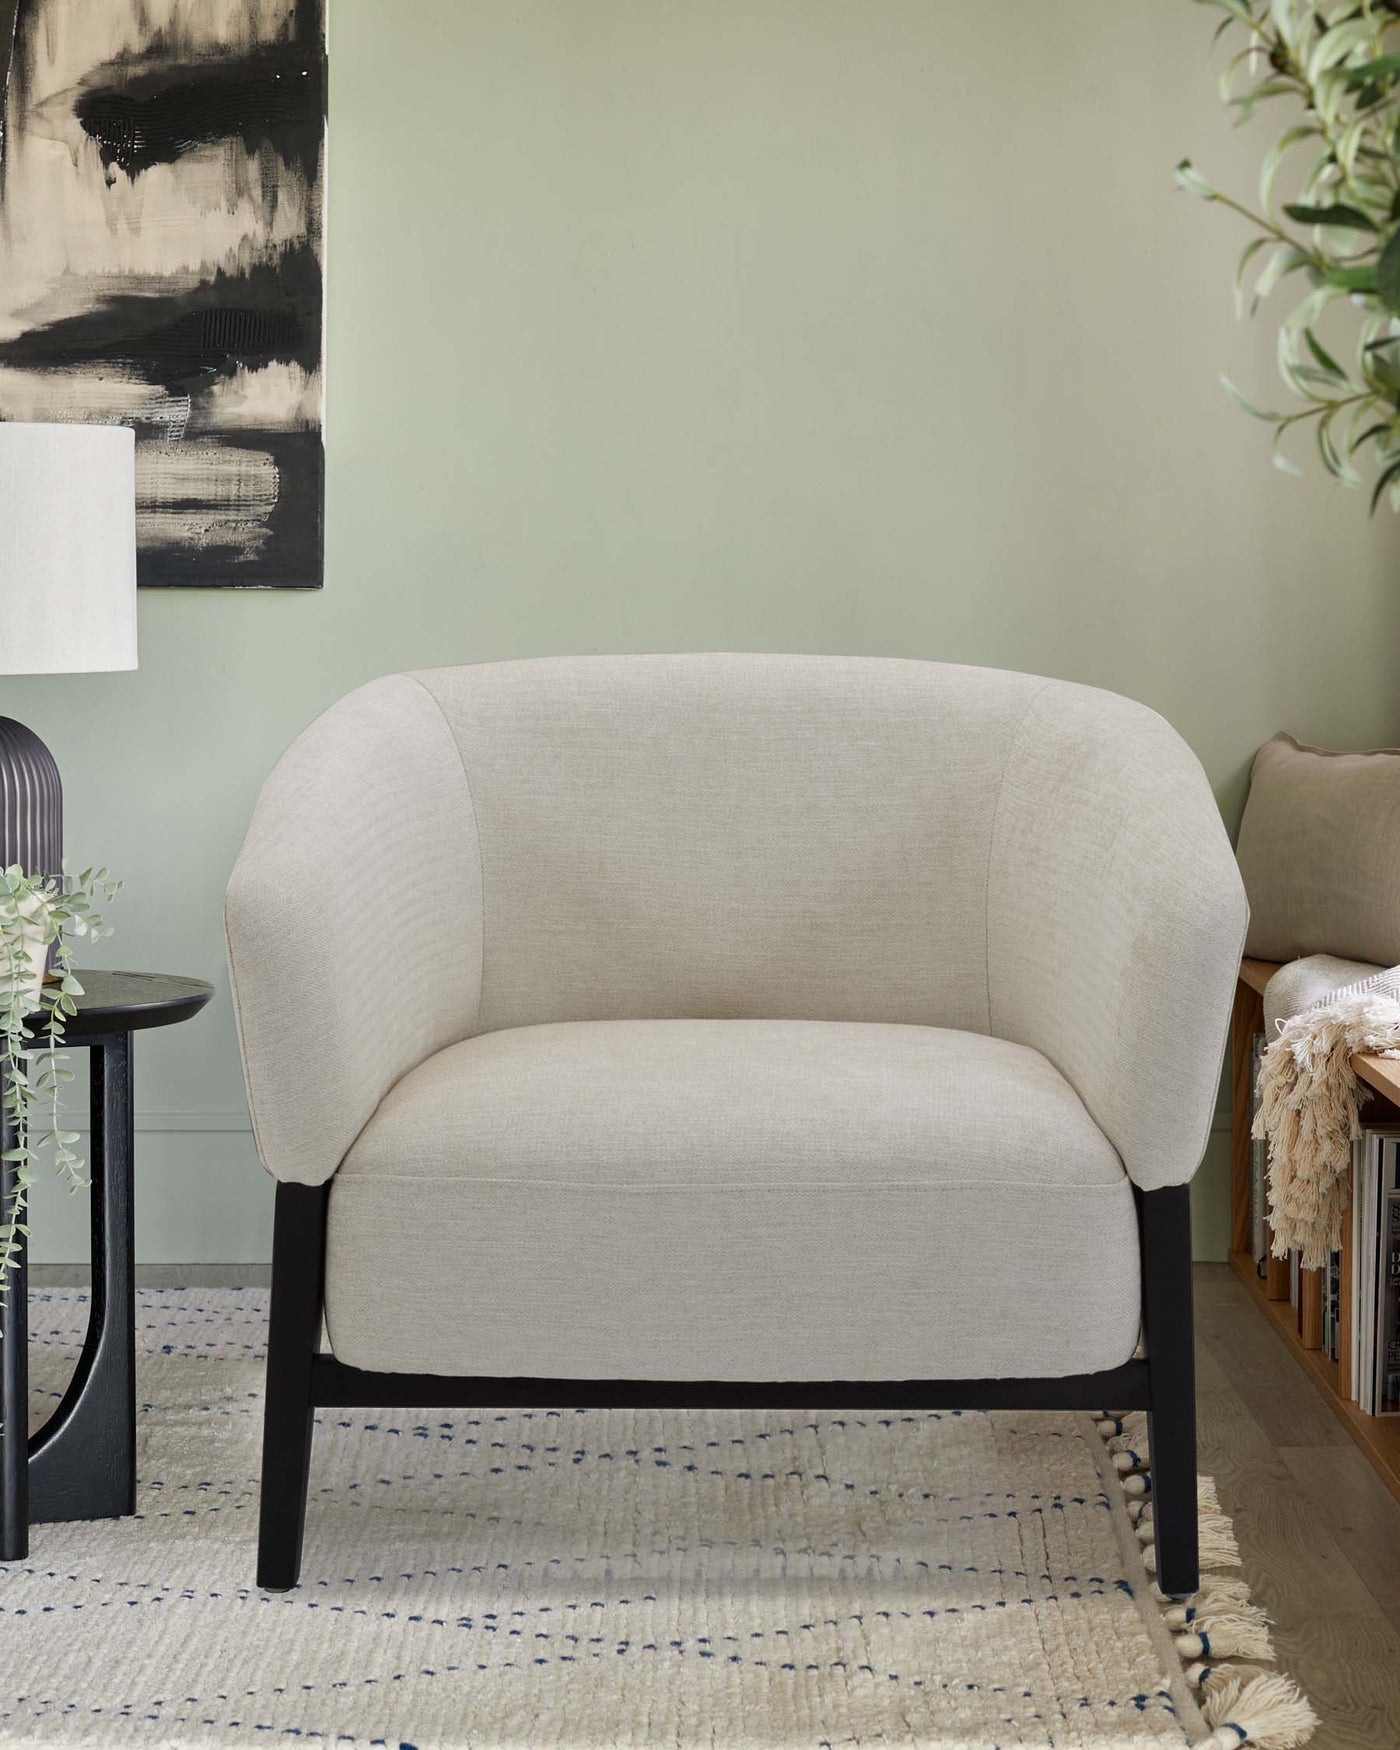 Modern light beige two-seater sofa with curved backrest and dark wooden legs, paired with a black round side table. The setting includes a textured beige rug with blue accents and a soft cream-colored tasselled throw on a bookshelf in the background.